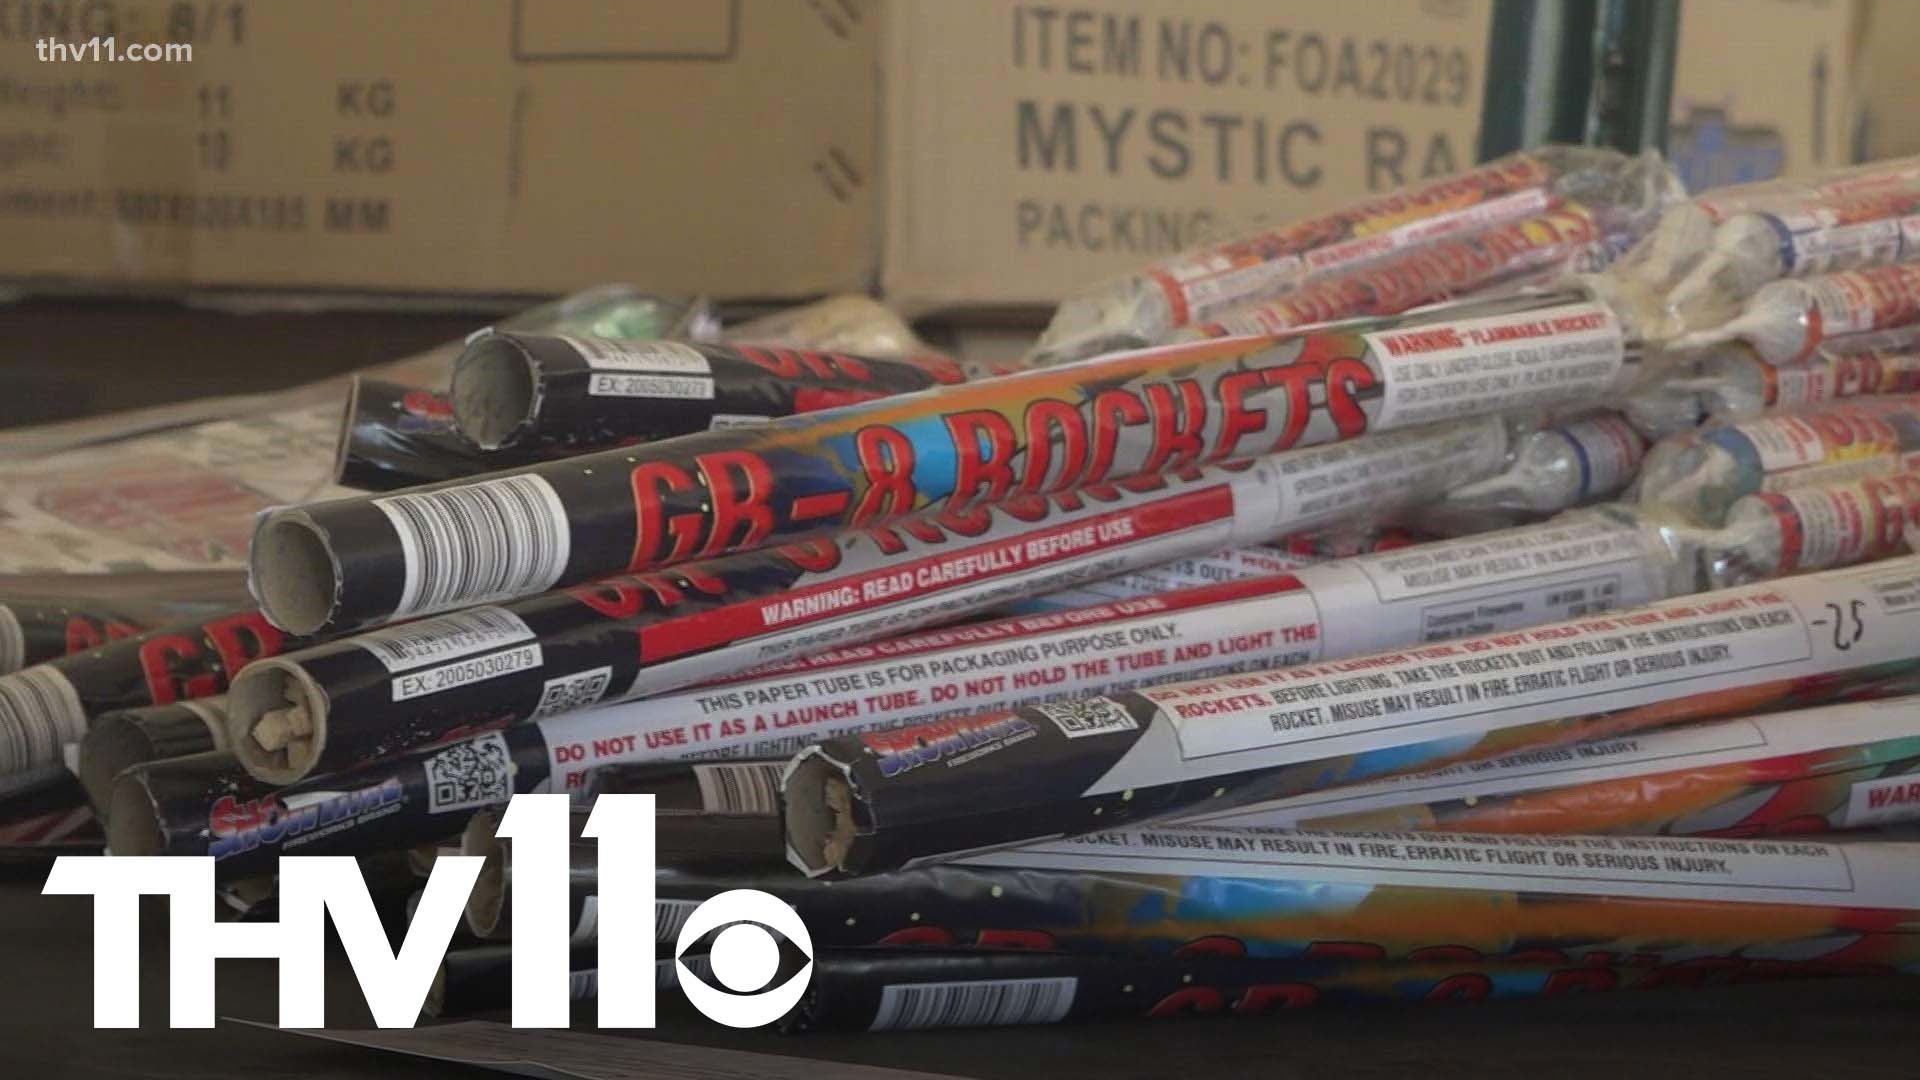 As we get closer to the Fourth of July, the price of sky rockets have soared according to Arkansas firework sellers.